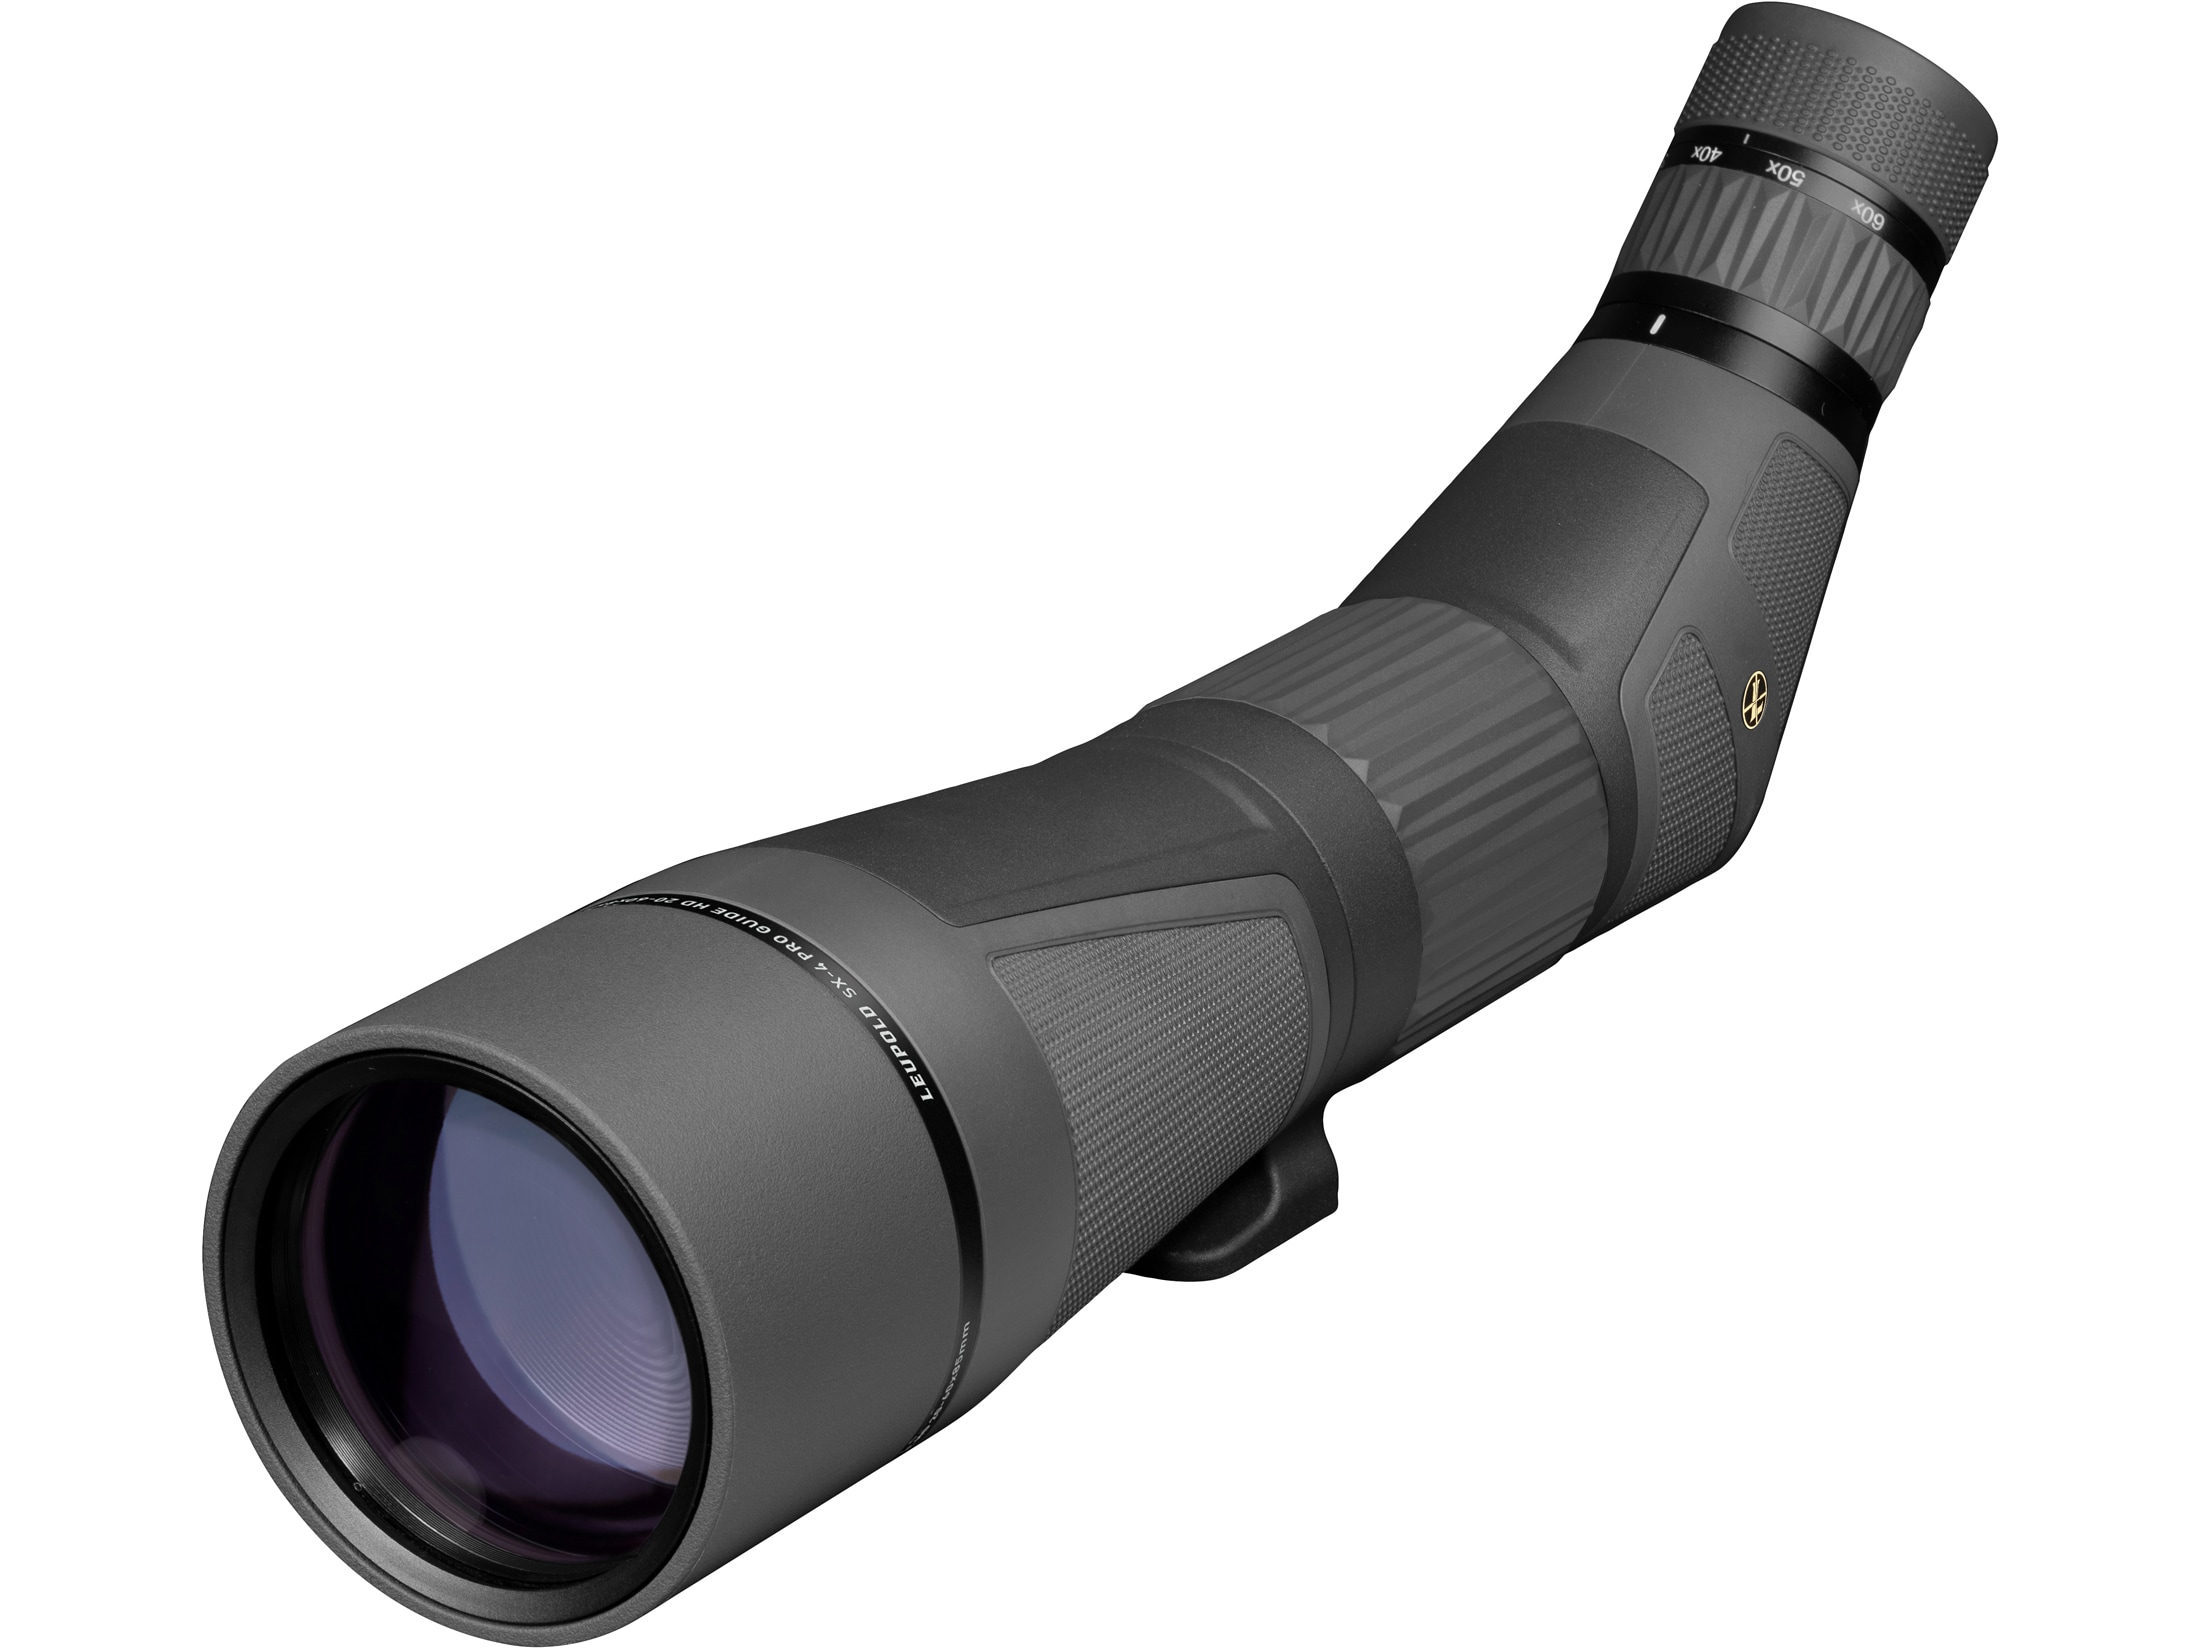 Leupold SX-4 Pro Guide Spotting Scope 20-60x 85mm For Sale